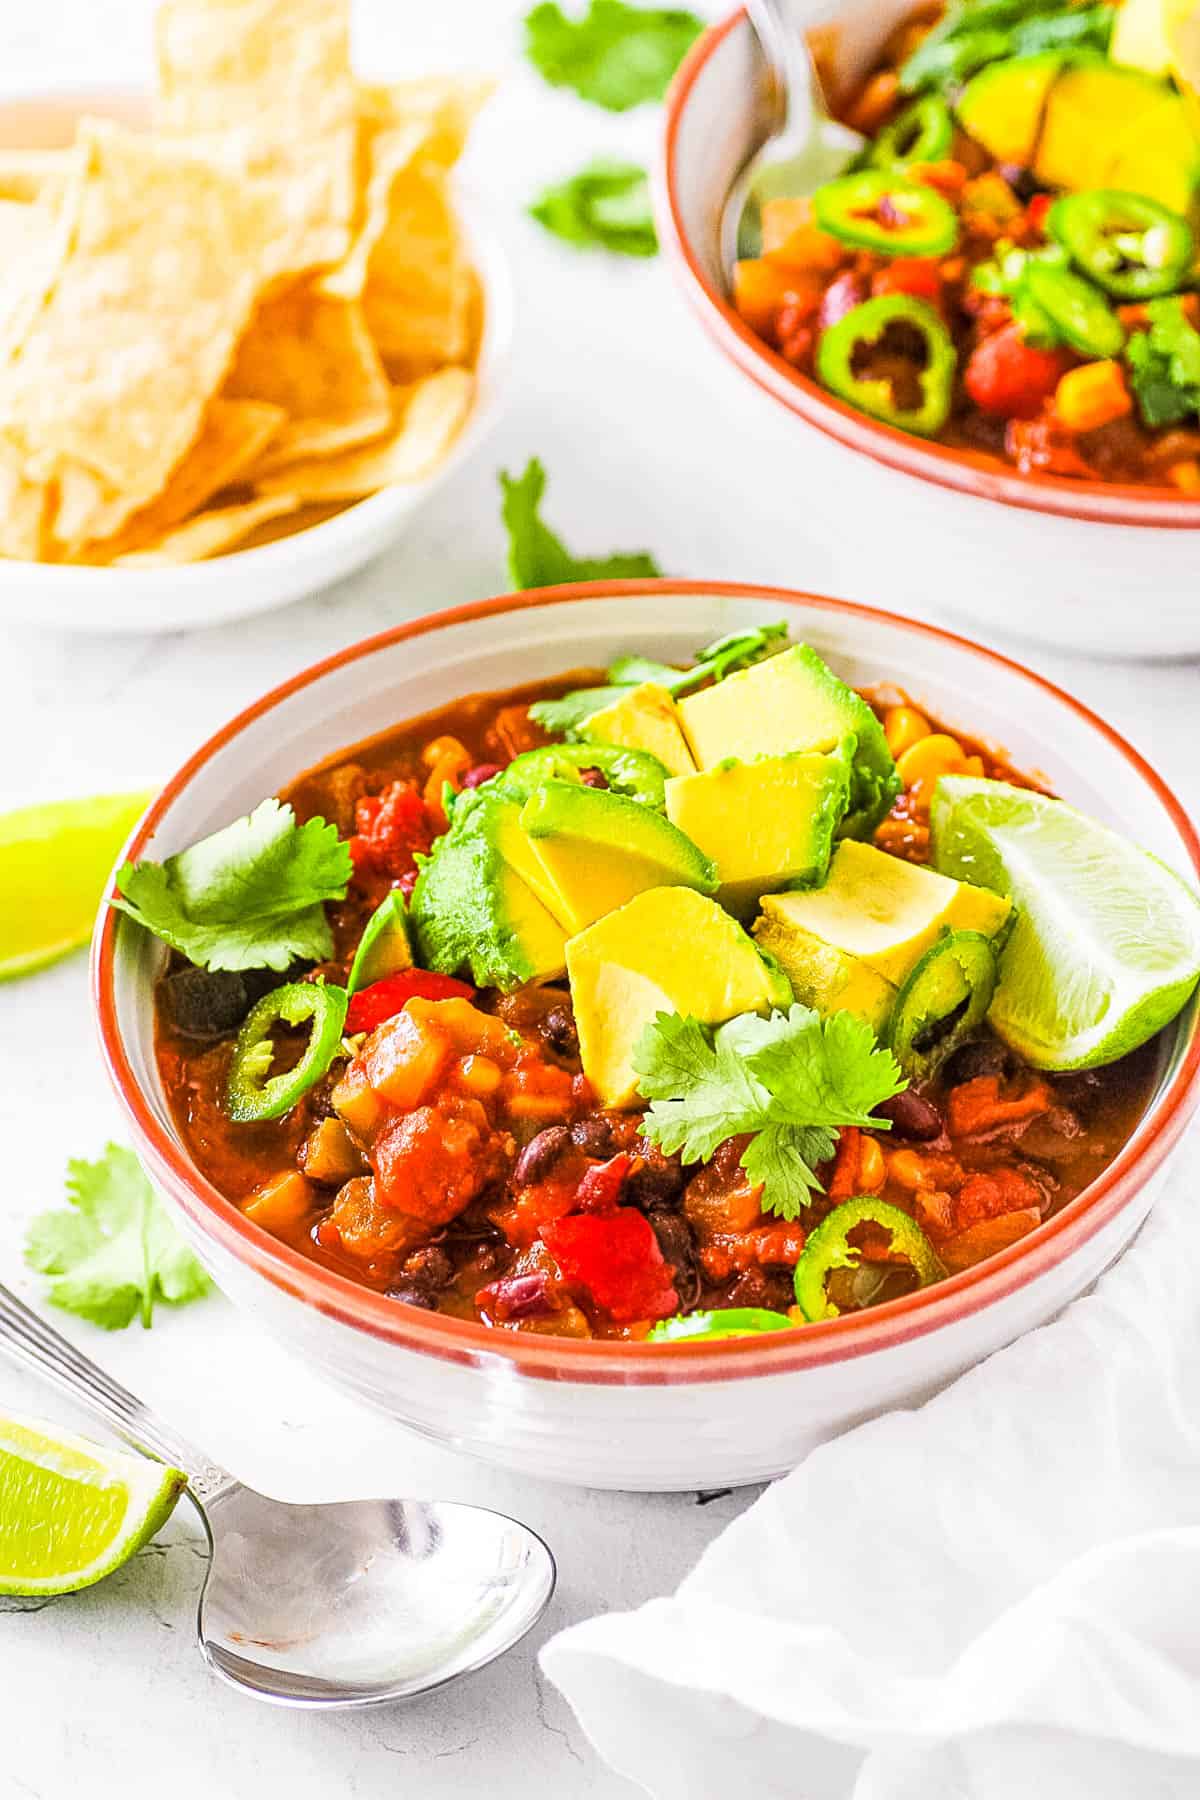 Vegan black bean chili, served in a white bowl, topped with avocado and lime.